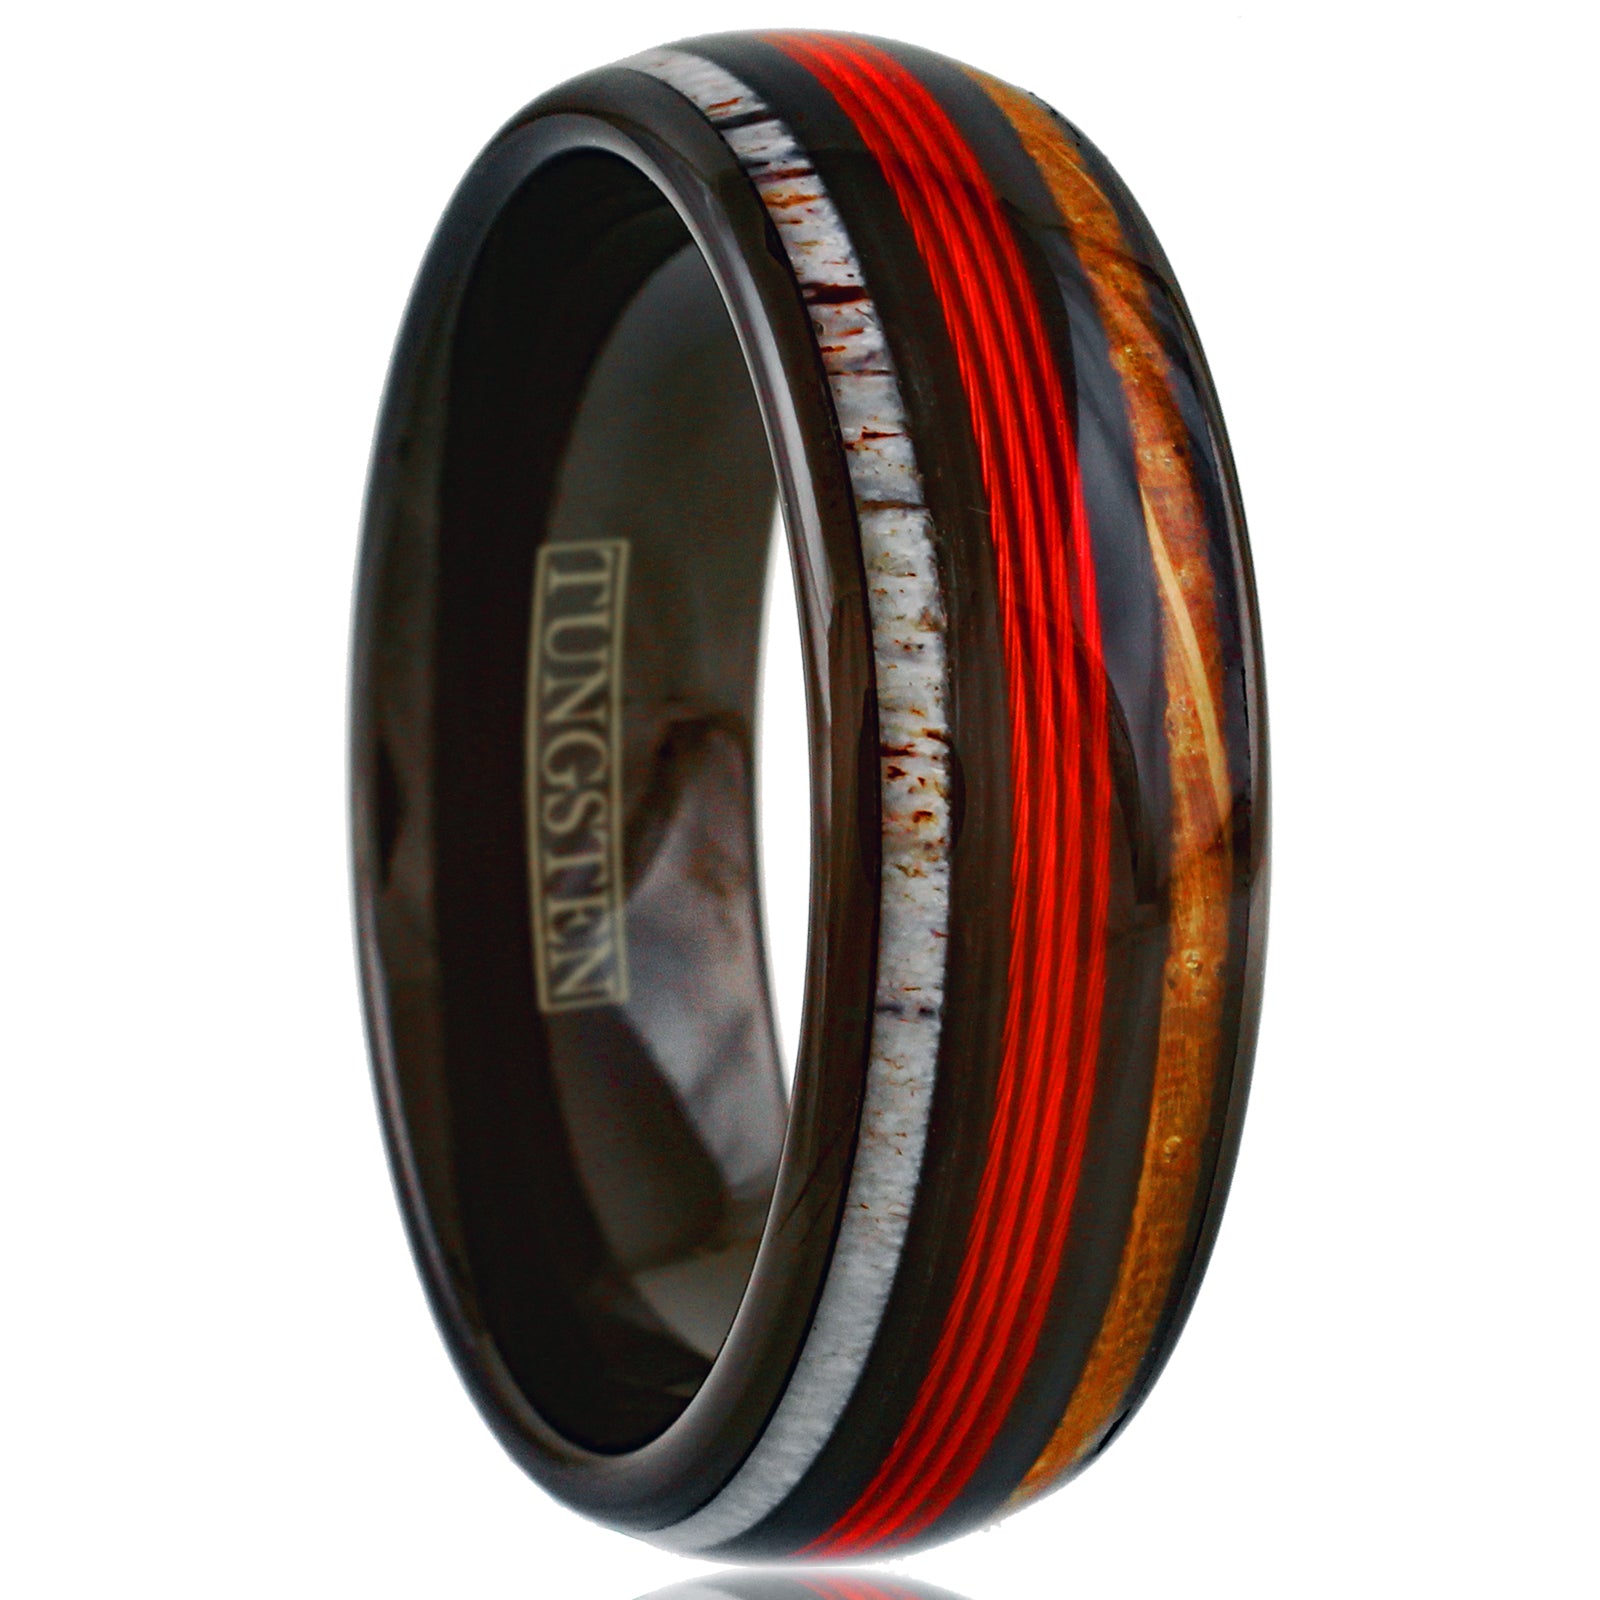 Stunning Magnificent Polished Black Tungsten Low Dome Ring with Ravishing  Red Real Fishing Line Between Whiskey Barrel Oak Wood and Deer Antler